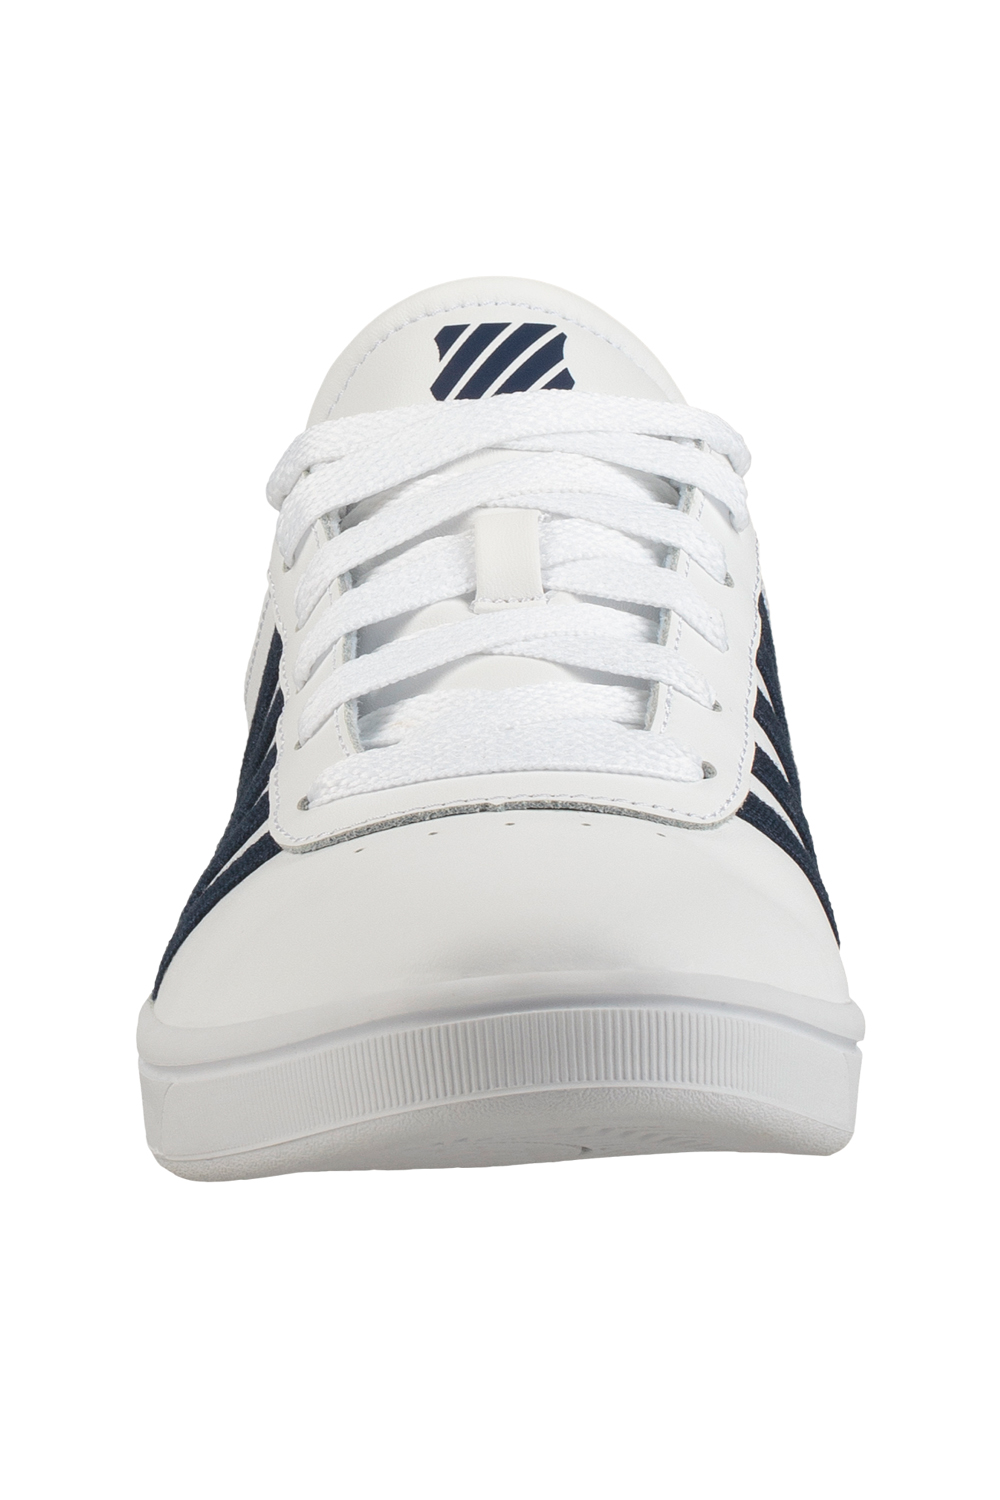 k swiss suede trainers